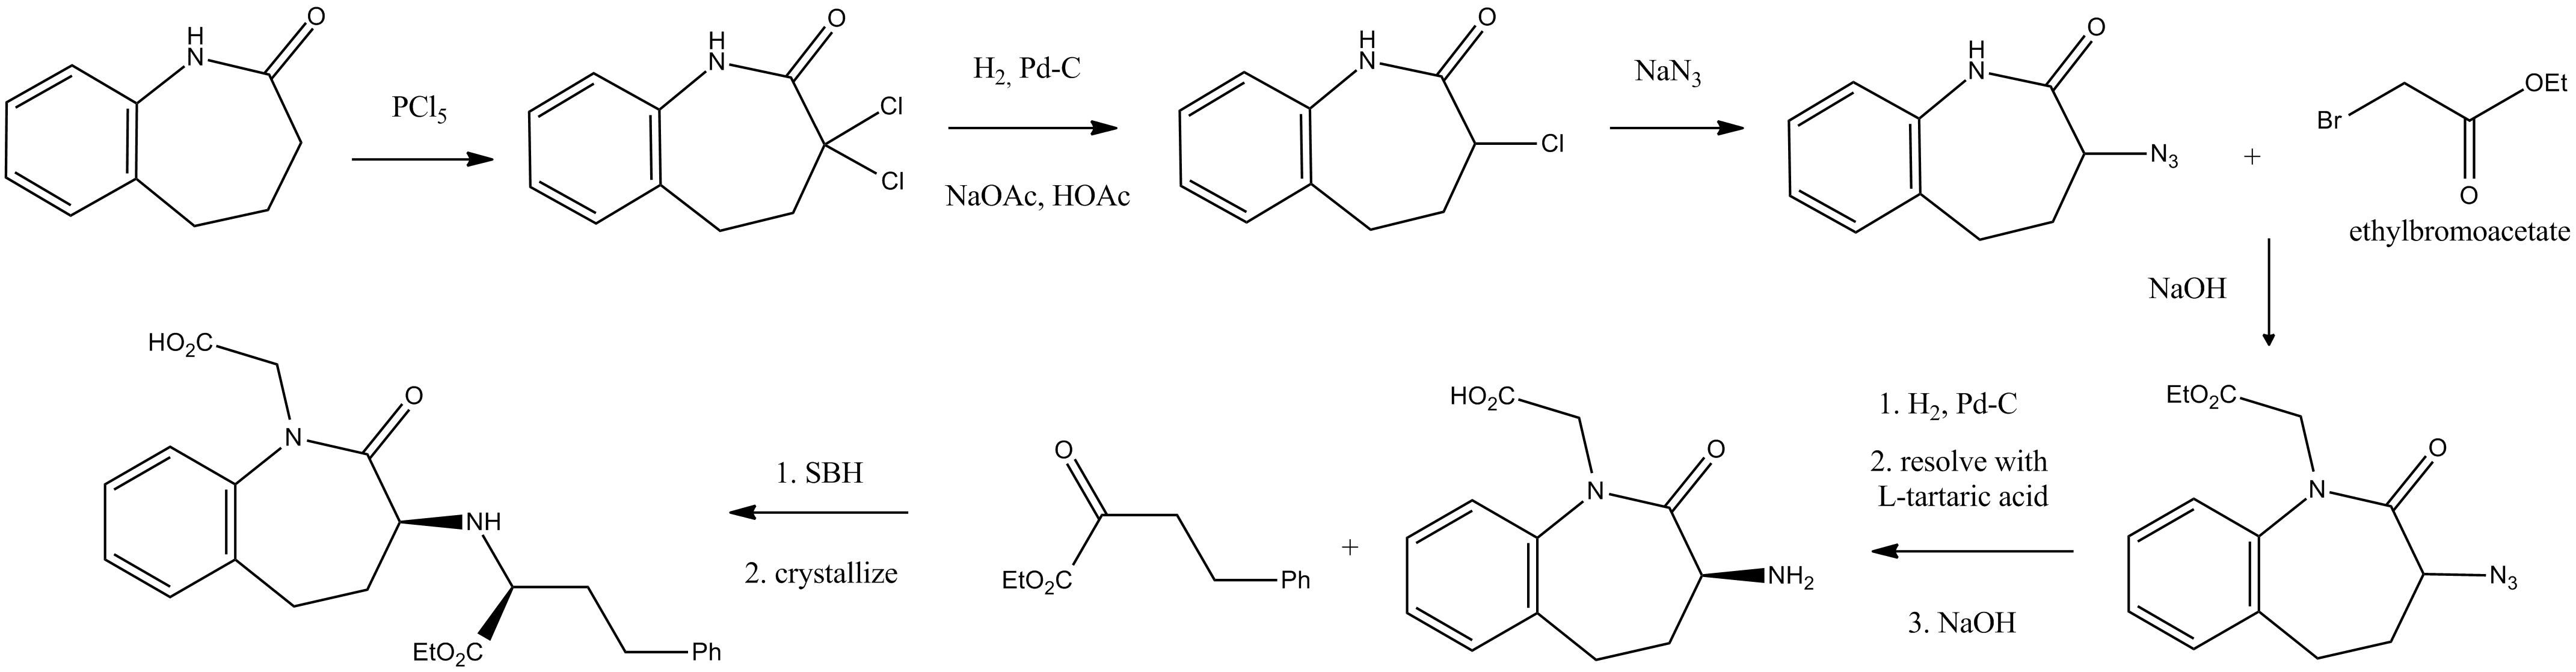 File:Bicalutamide synthesis.p